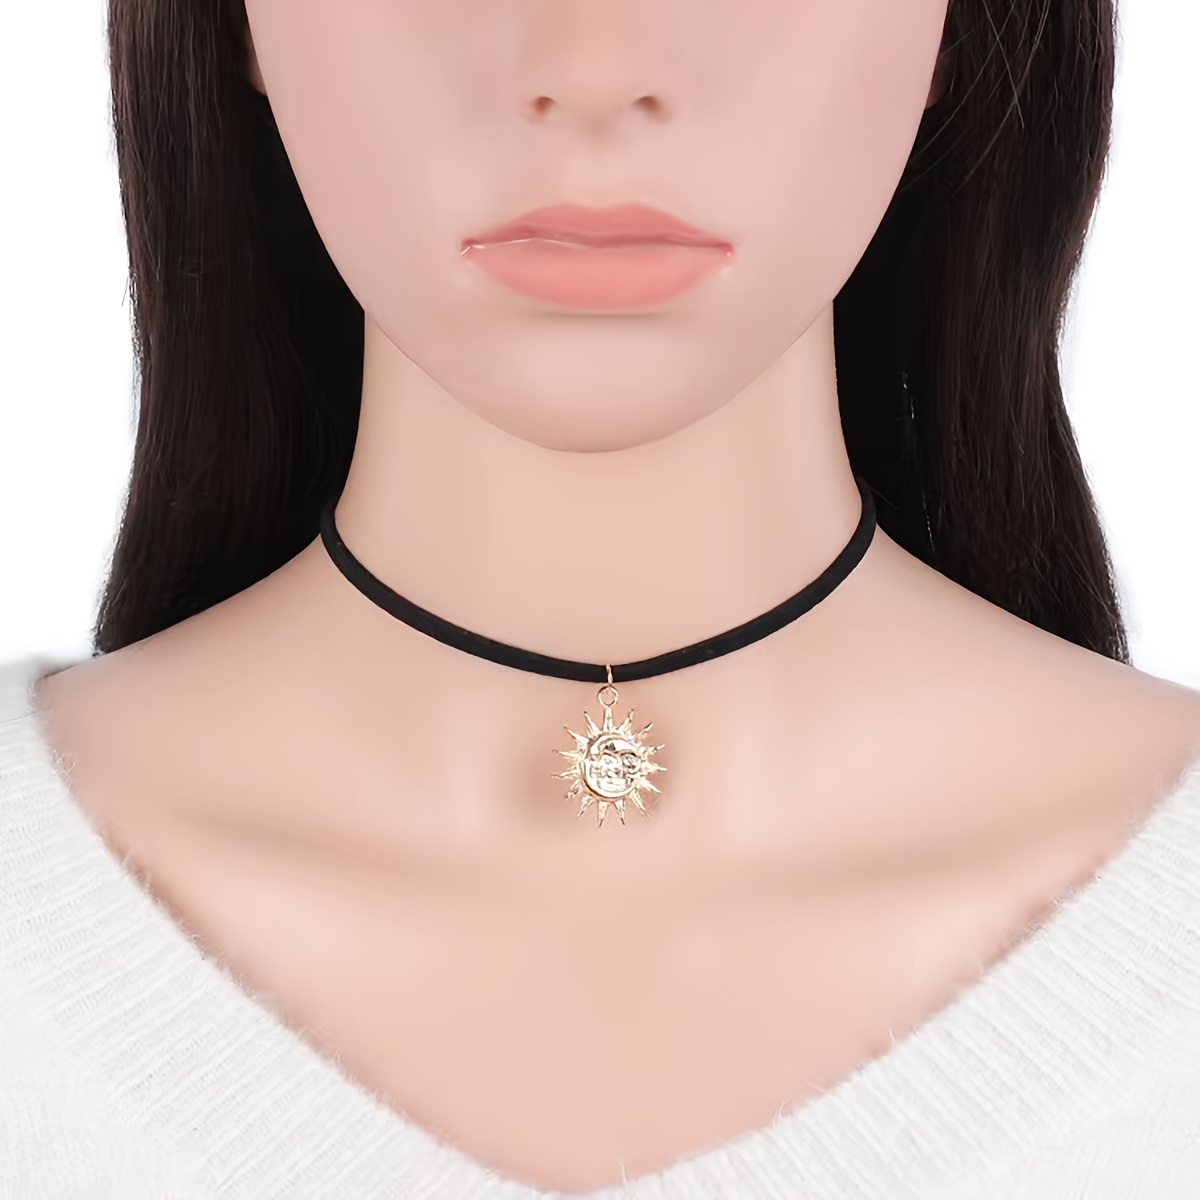 Layered Necklace Chain for Women Girls - Stars and Moon Choker